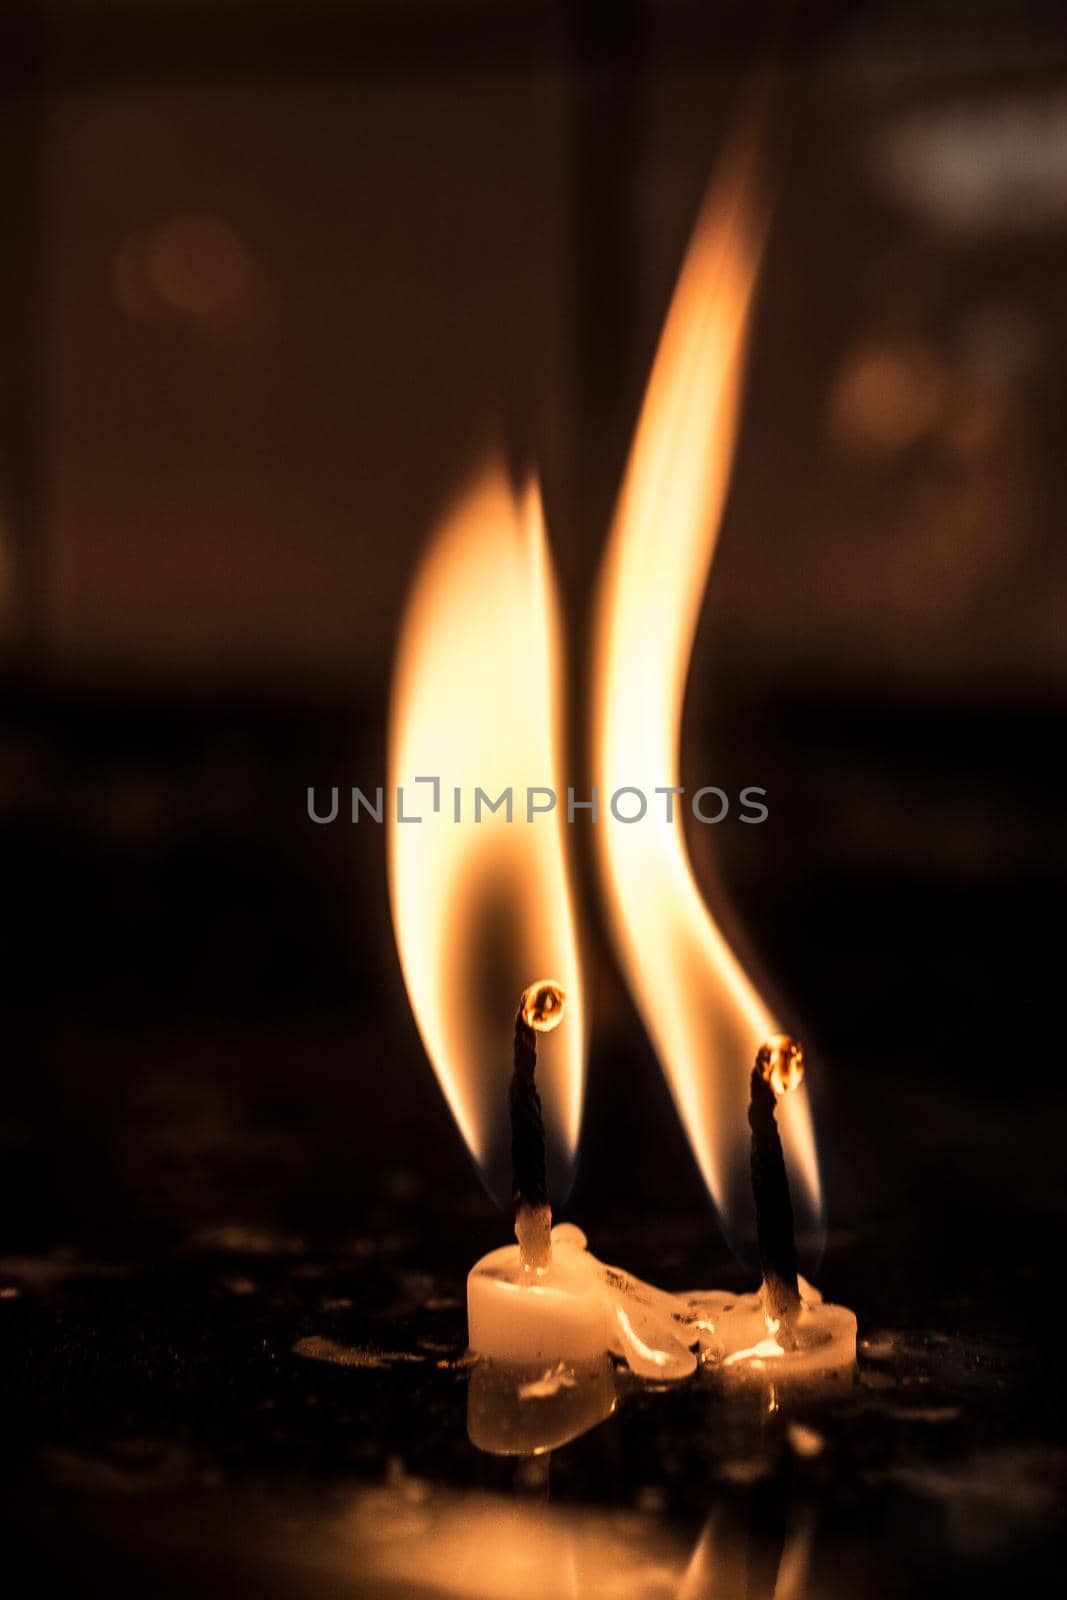  burning candle making light in view as a background by berkay